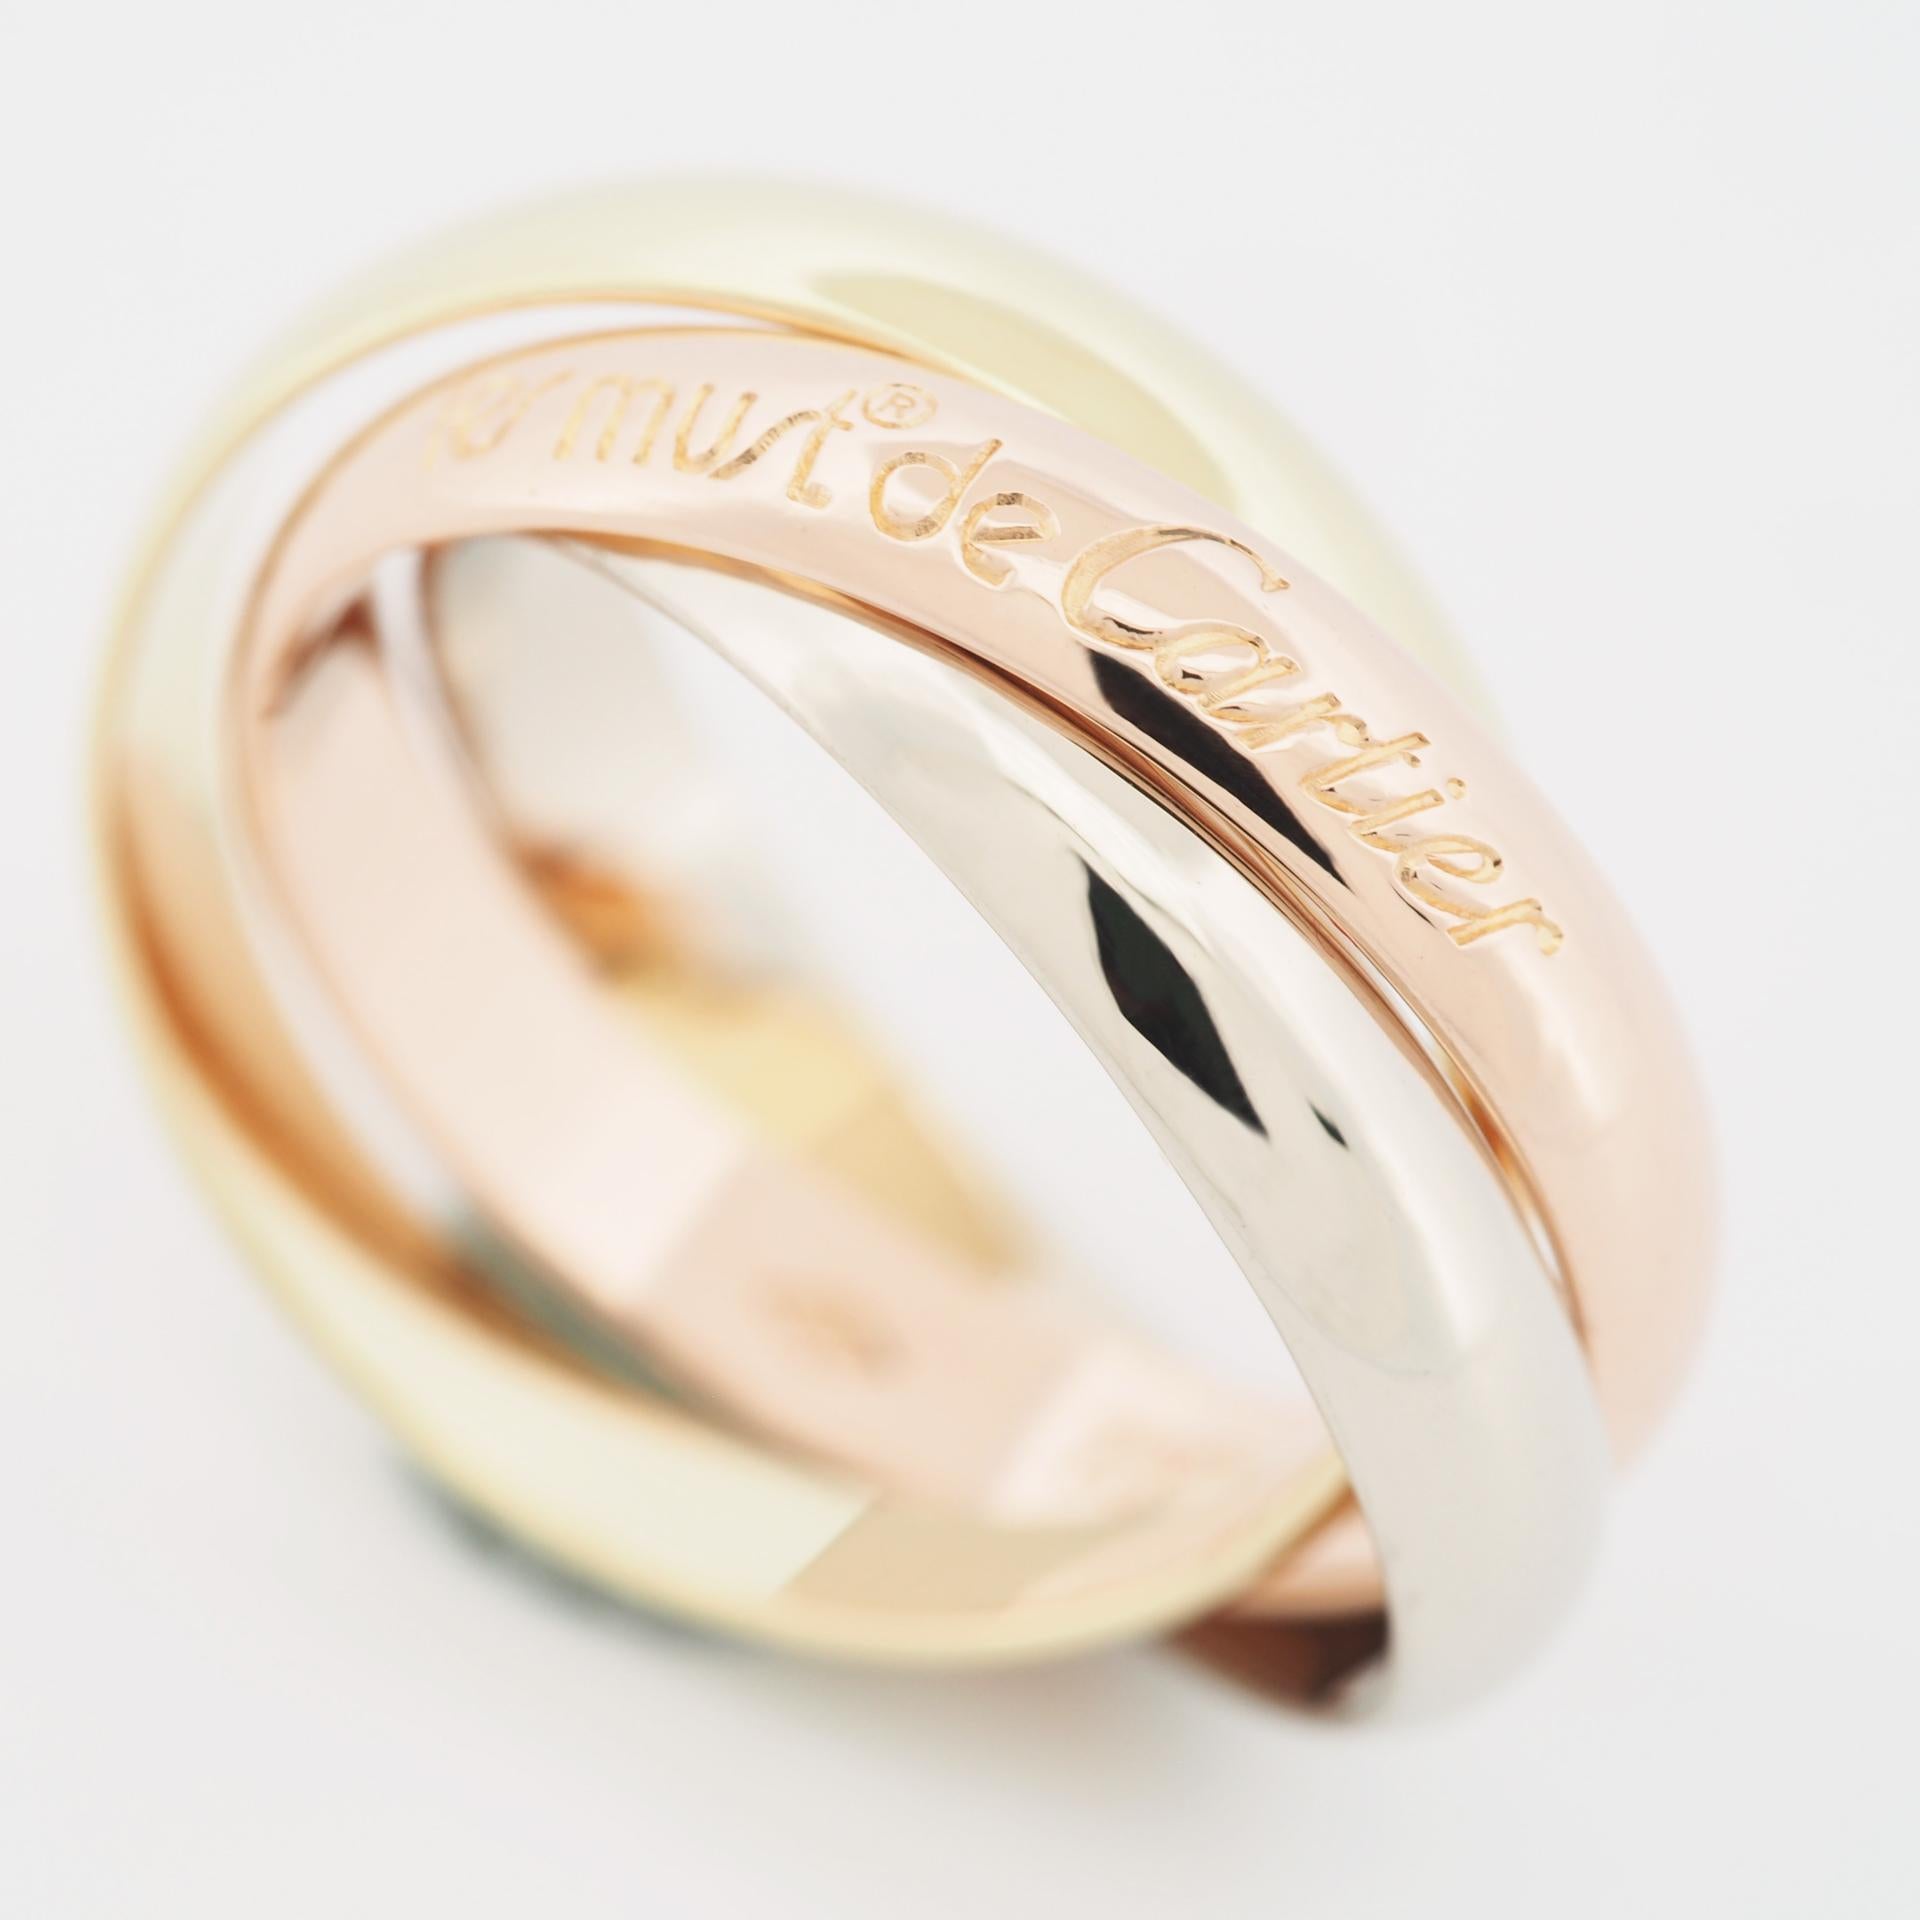 Item: Authentic Cartier 3 Bands Trinity Ring
Stones: ---
Metal: 18K Yellow / Rose / White Gold
Ring Size: 52 US SIZE 5.75 UK SIZE L
Internal Diameter: 16.35 mm
Measurement: 3.4 mm width ( each band )
Weight: 7.8 Grams
Condition: Used